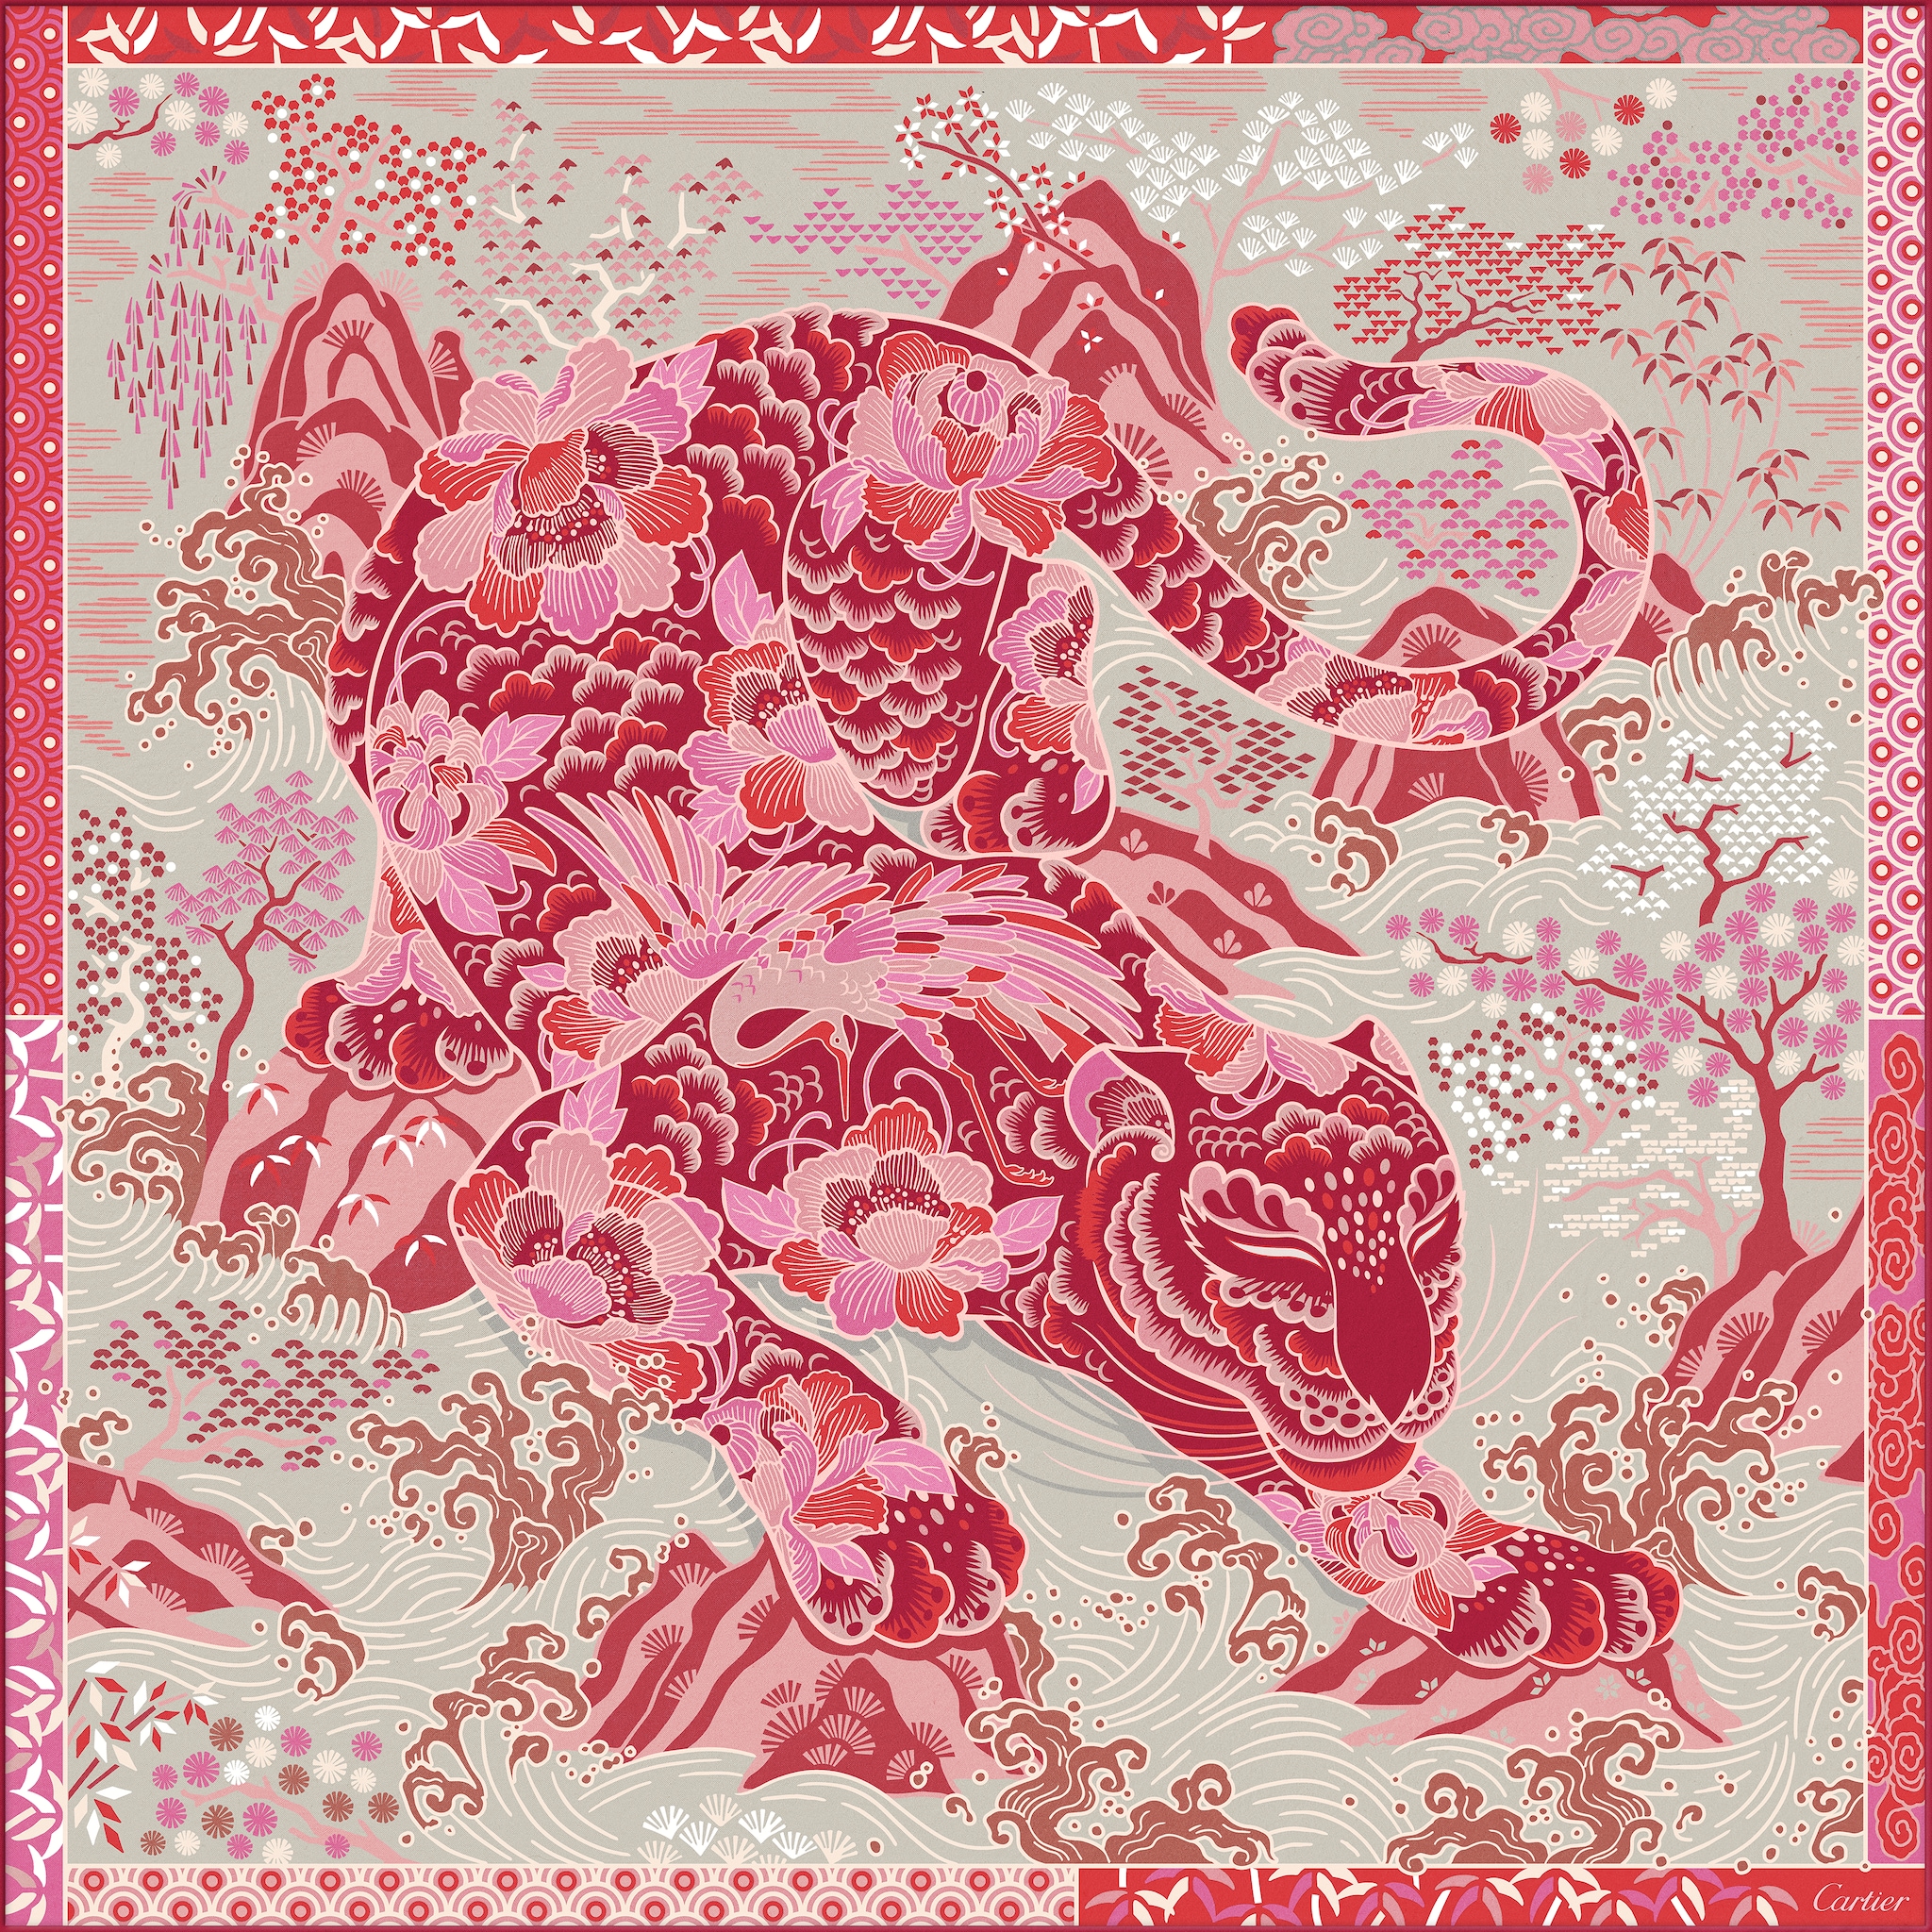 Panther print squareRed and beige silk twill